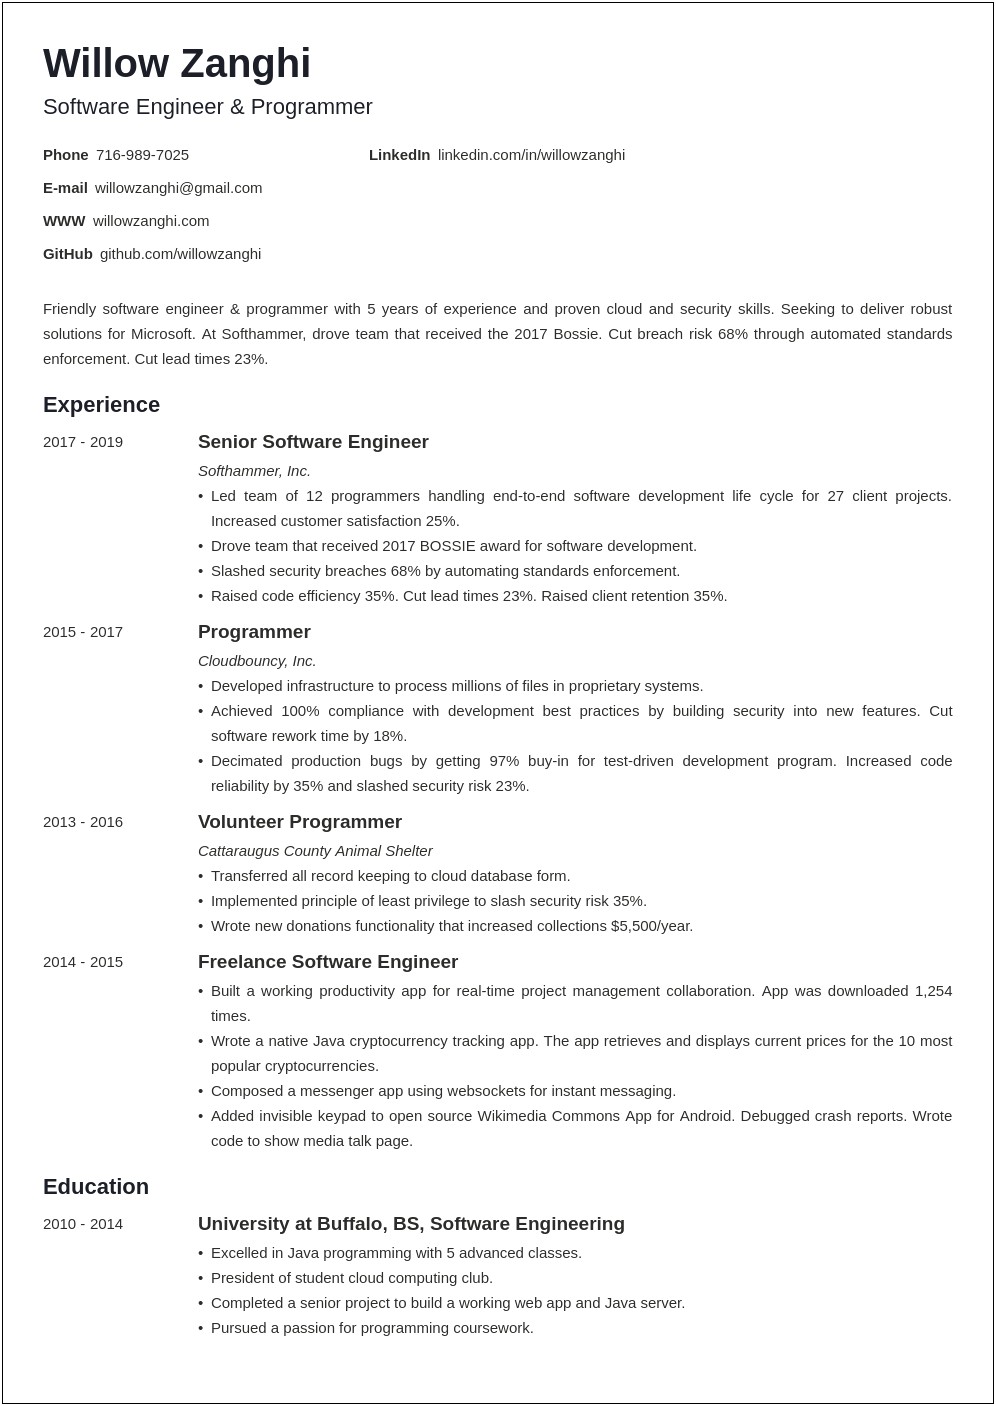 Resume Experience Chronological Order Or Relevance